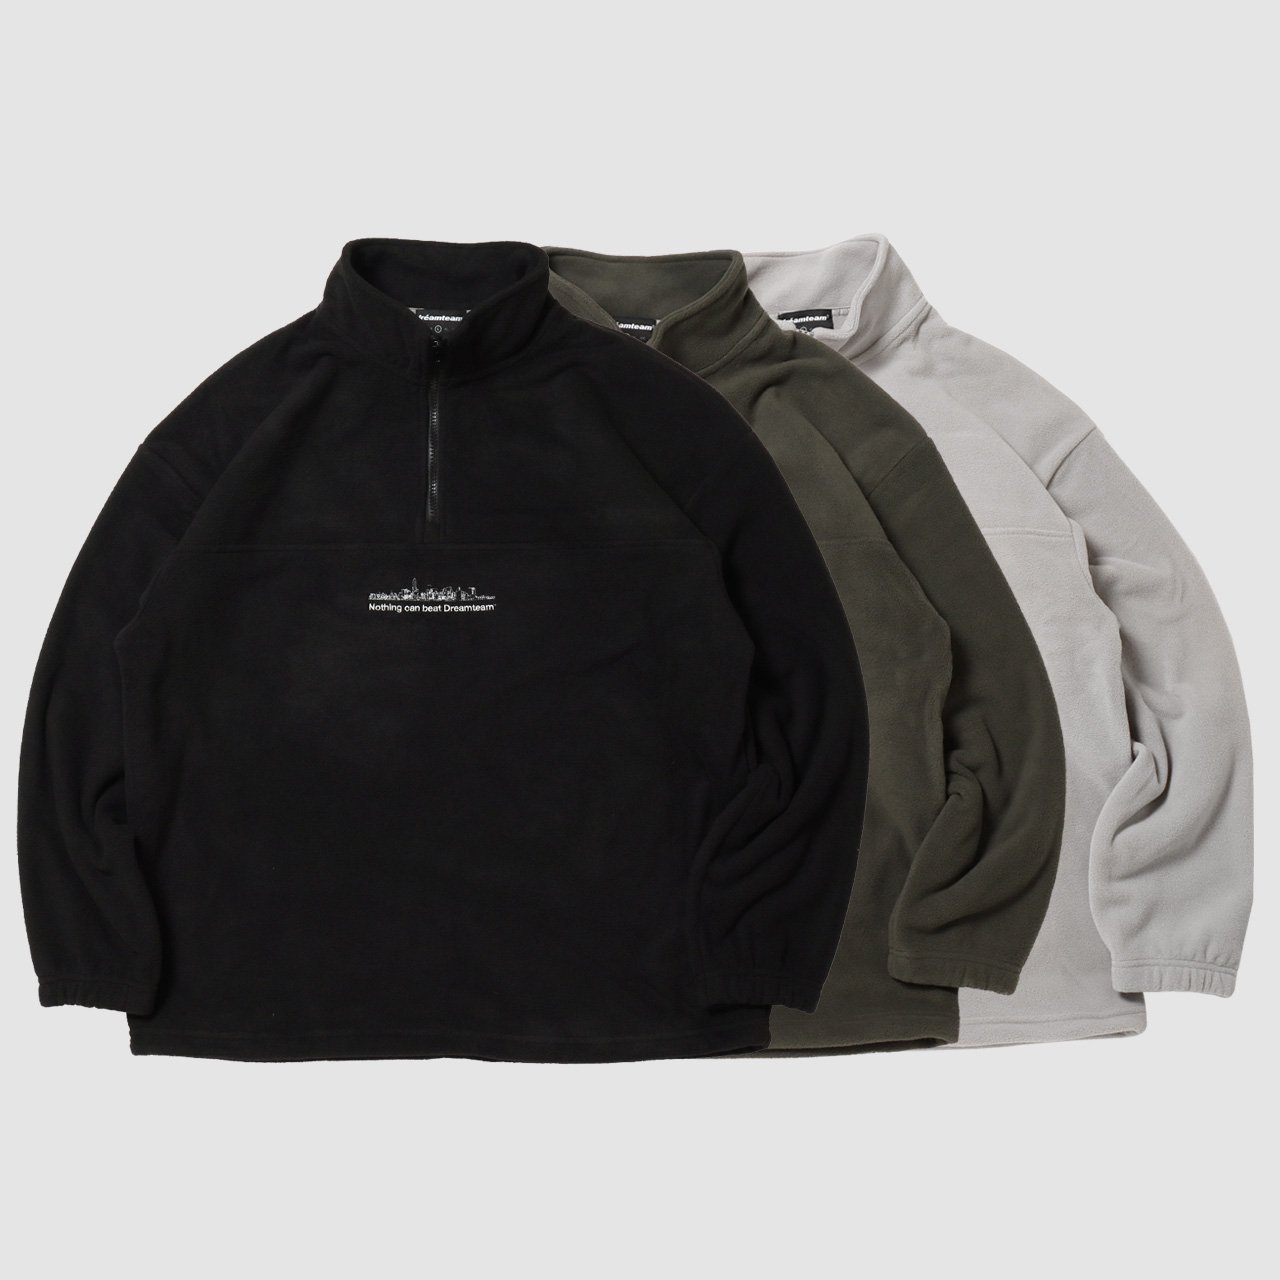 <img class='new_mark_img1' src='https://img.shop-pro.jp/img/new/icons21.gif' style='border:none;display:inline;margin:0px;padding:0px;width:auto;' />Nothing can beat DT Half Zip Fleece